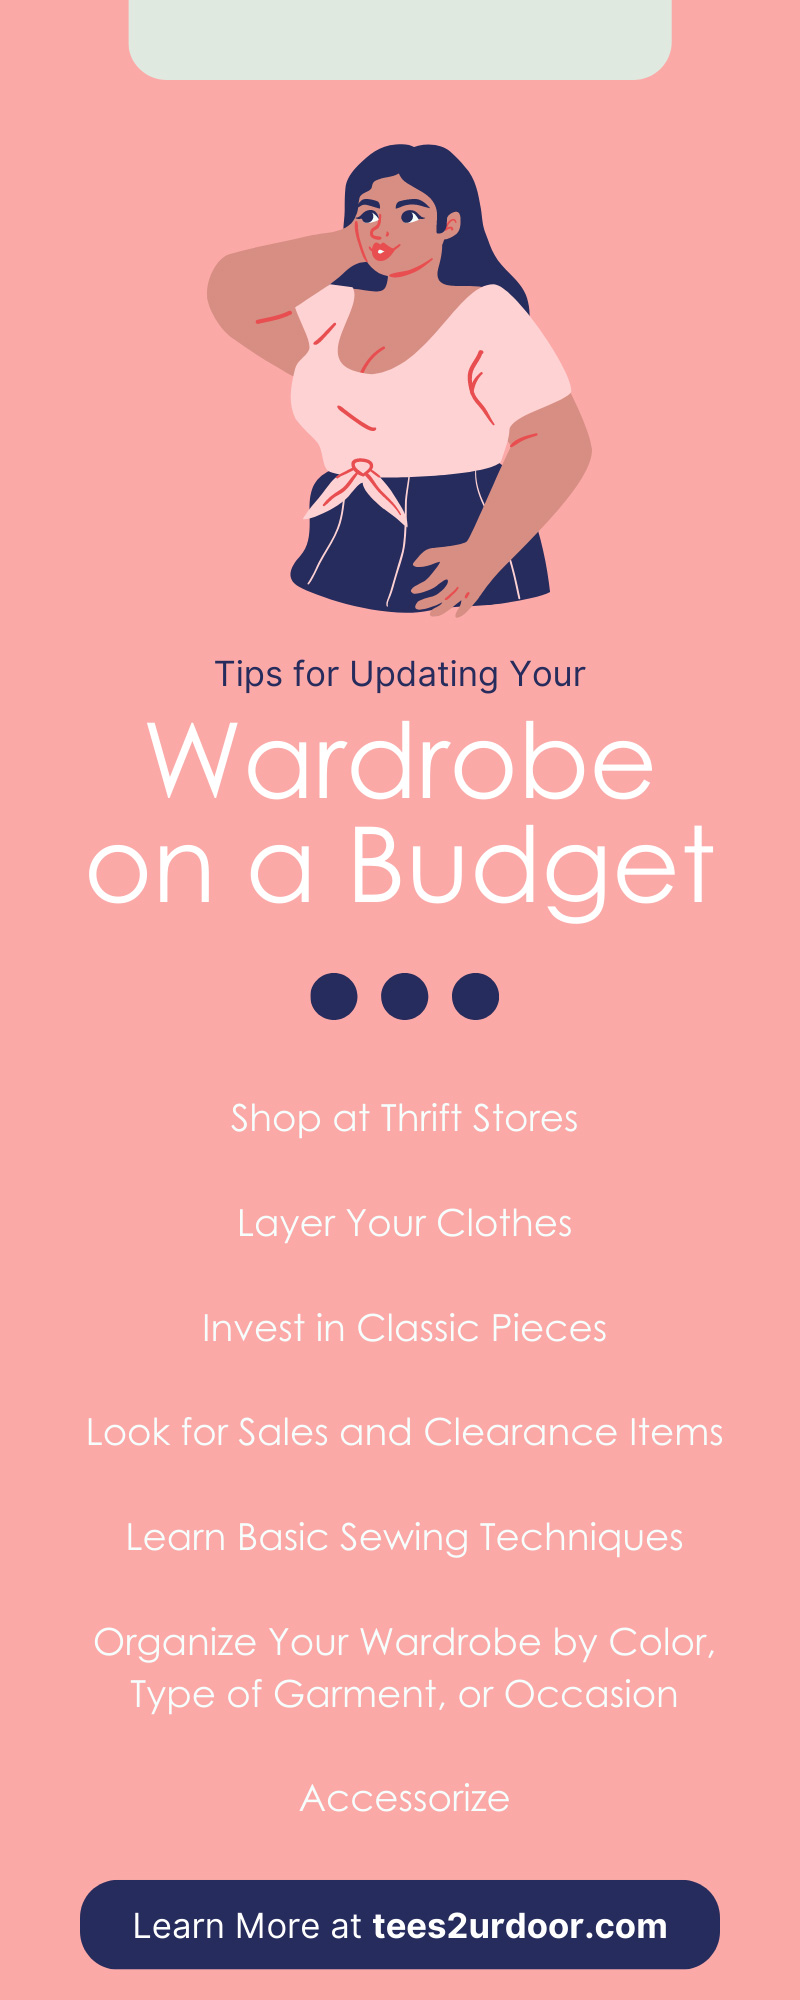 7 Tips for Updating Your Wardrobe on a Budget